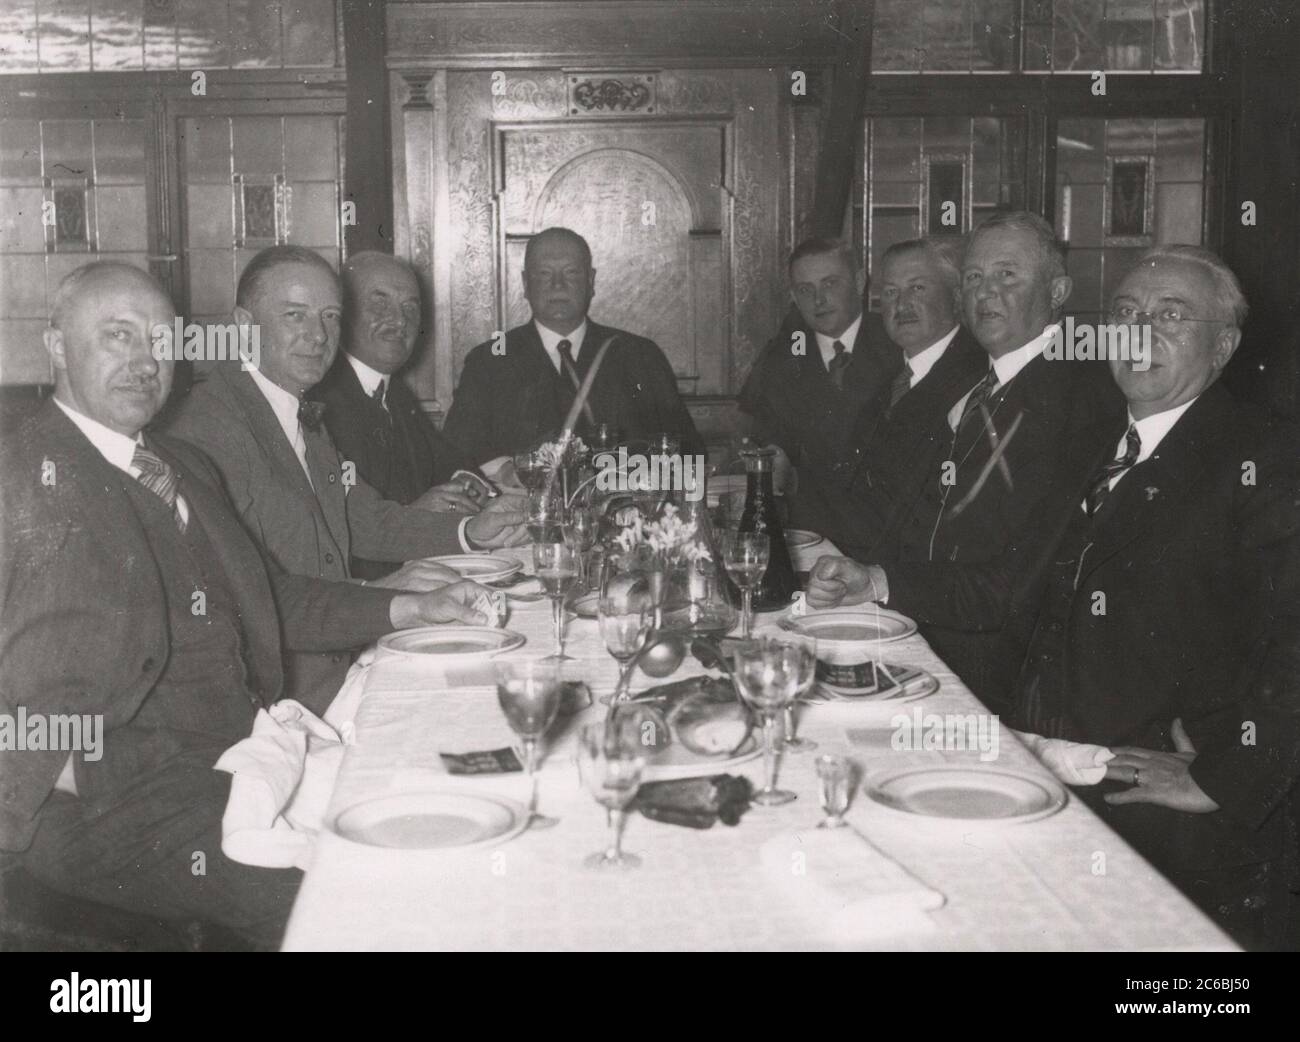 Visit to the Mercedes Reich Minister of Transport Dorpmueller and General Director Allmers Heinrich Hoffmann Photographs 1934 Adolf Hitler's official photographer, and a Nazi politician and publisher, who was a member of Hitler's intimate circle. Stock Photo